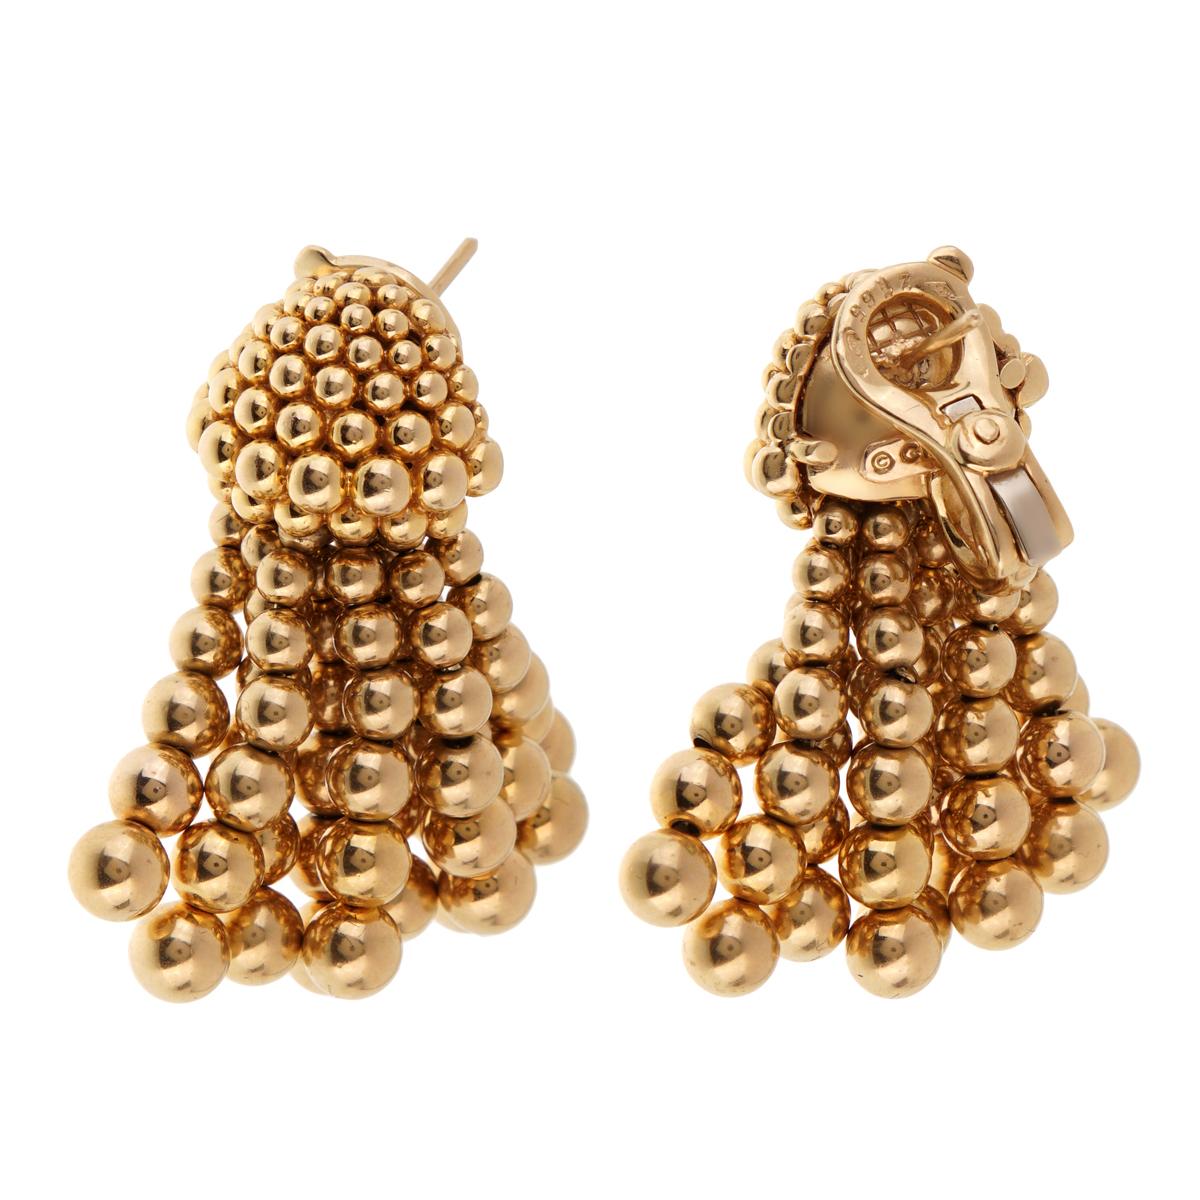 A magnificent pair of vintage Chanel earrings featuring a tassle drop motif in 18k yellow gold. The free flowing design is perfect for a night out on the town. The earrings measures 1.45